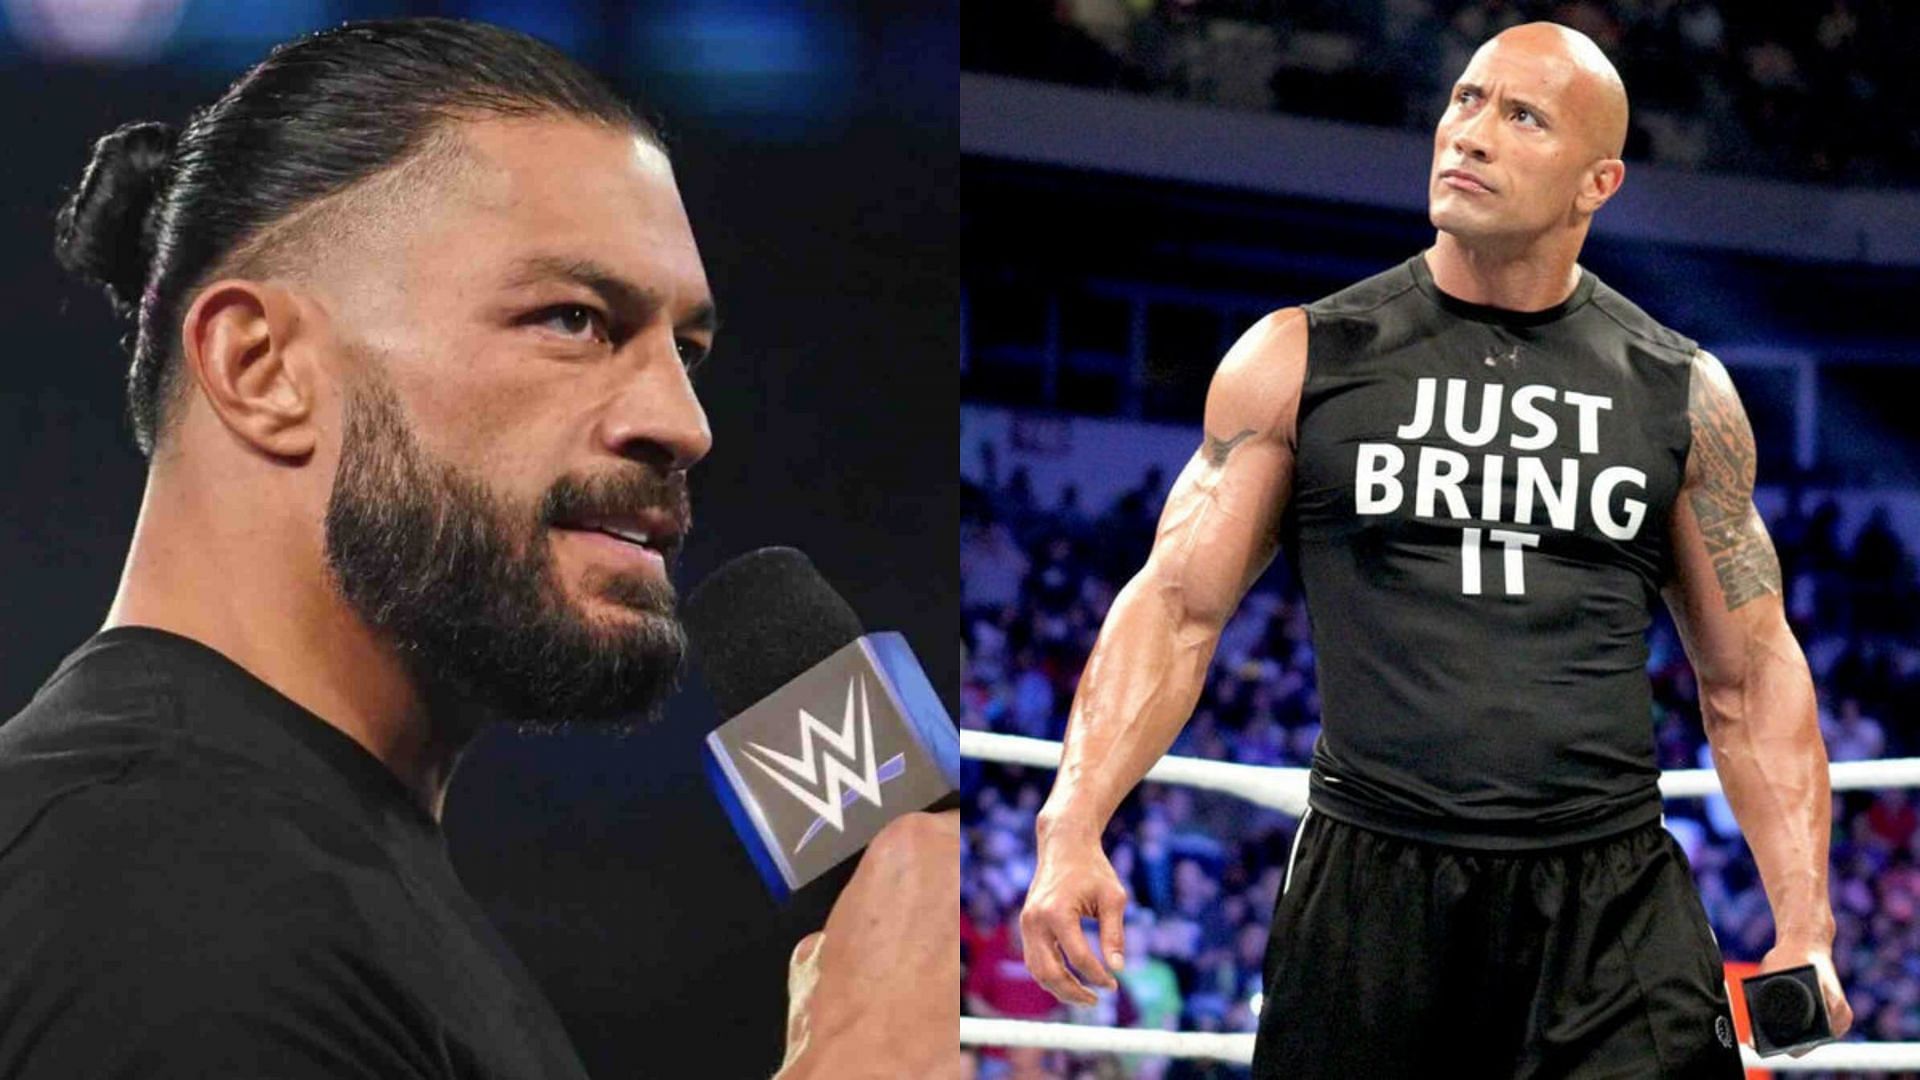 Will The Rock return to WWE to face Roman Reigns?